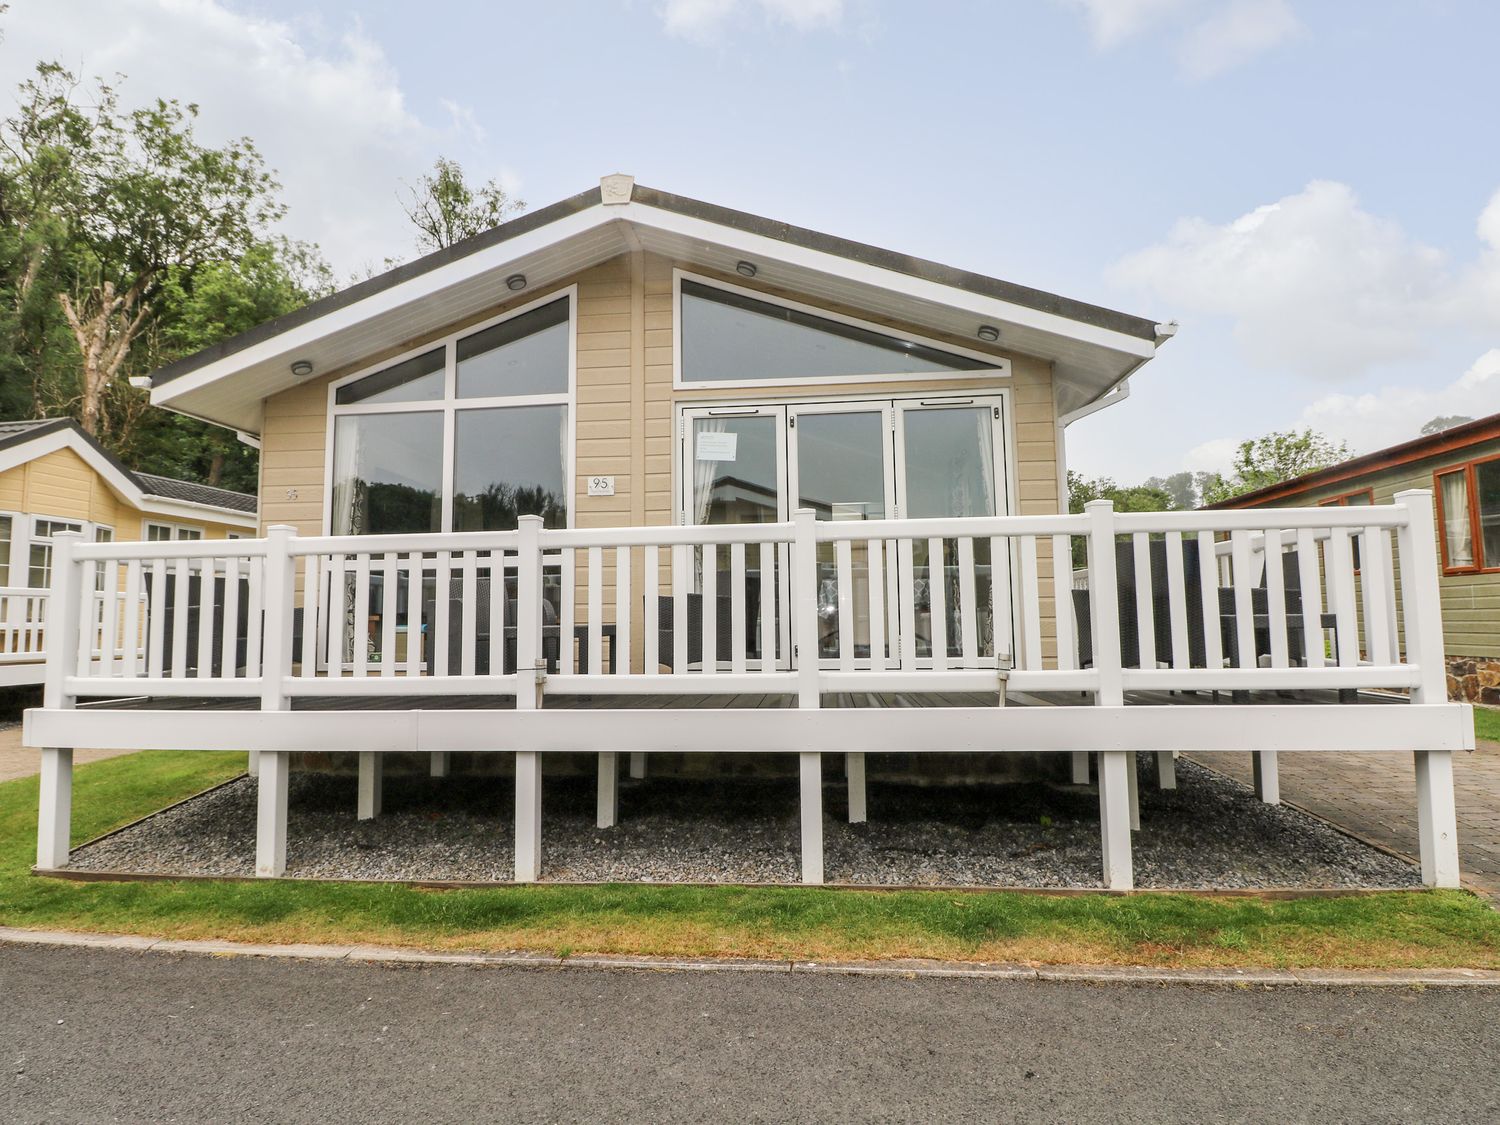 95 The Haven - South Wales - 934407 - photo 1